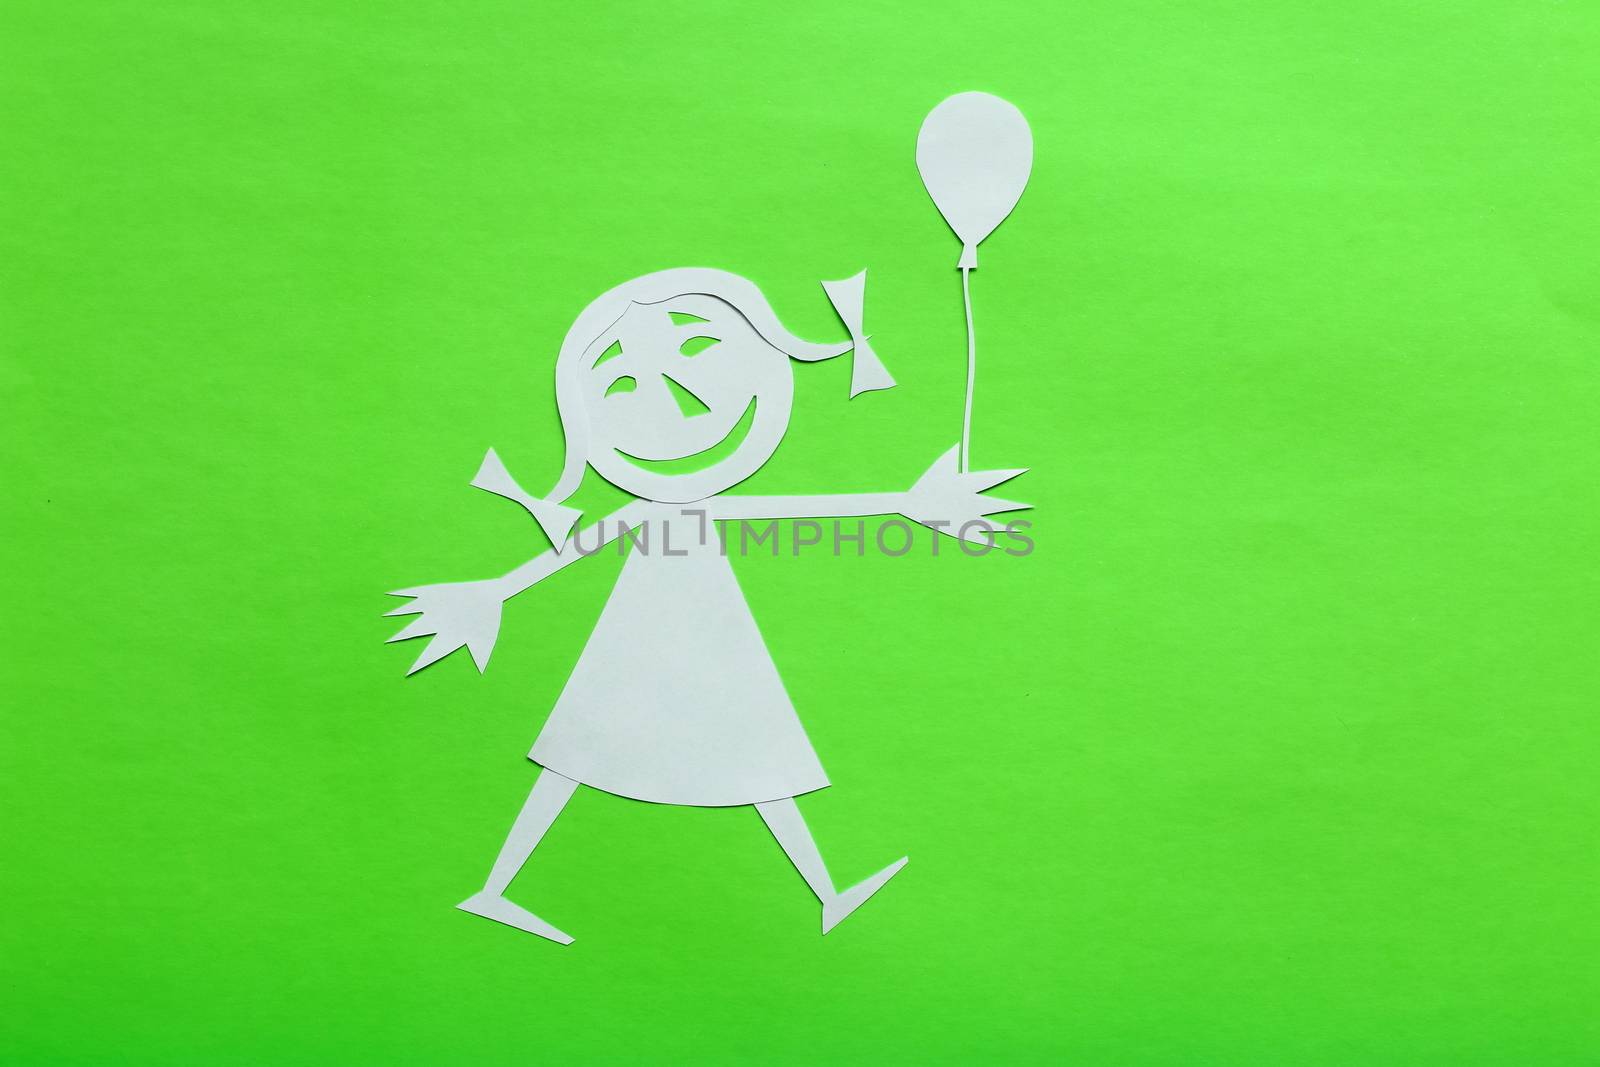 background of colored cardboard. the girl is made of white paper. in the style of a funny cartoon.